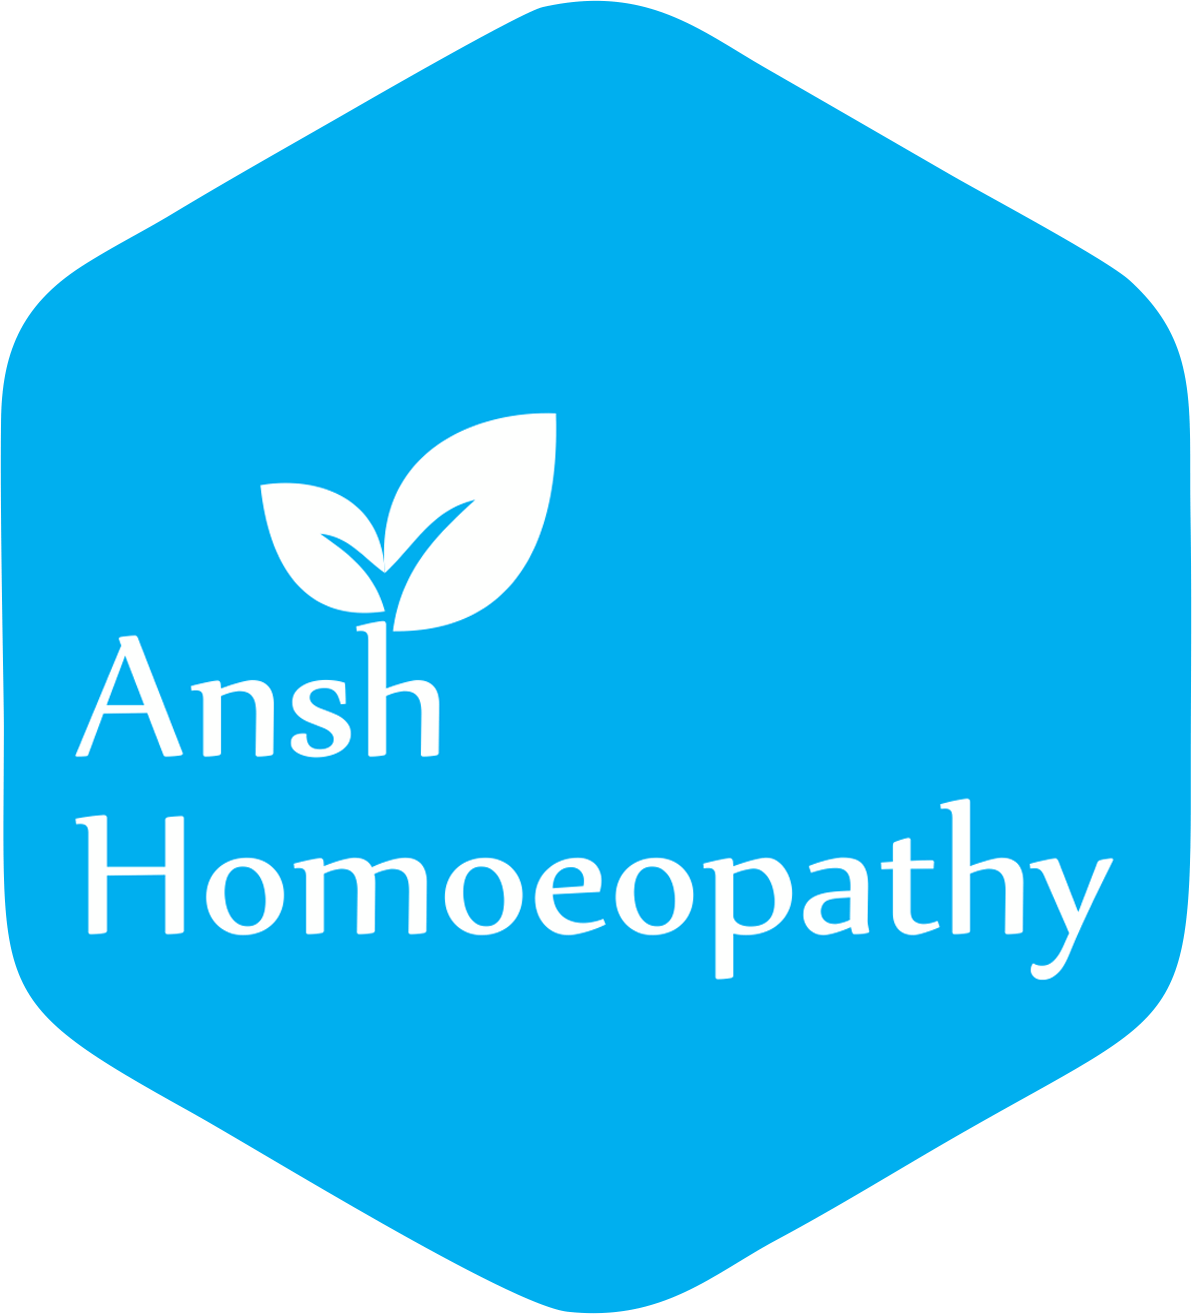 Sai Homeopathy & Diet Clinic in Pune, India